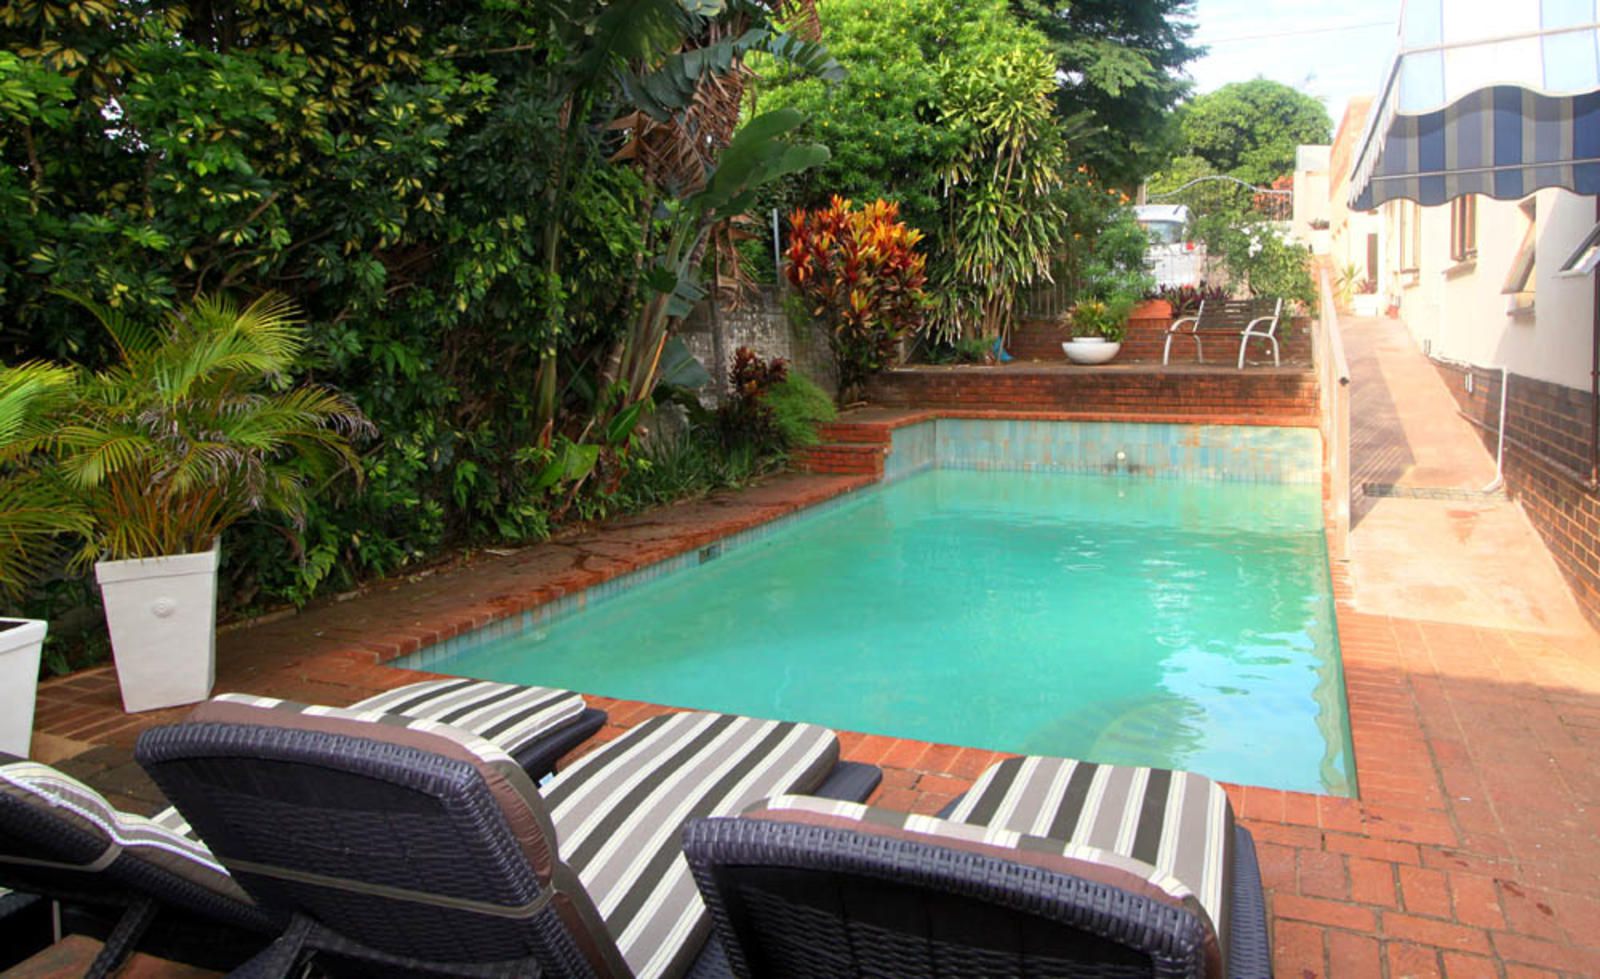 Kelvin Lodge And Spa Durban North Durban Kwazulu Natal South Africa House, Building, Architecture, Garden, Nature, Plant, Swimming Pool